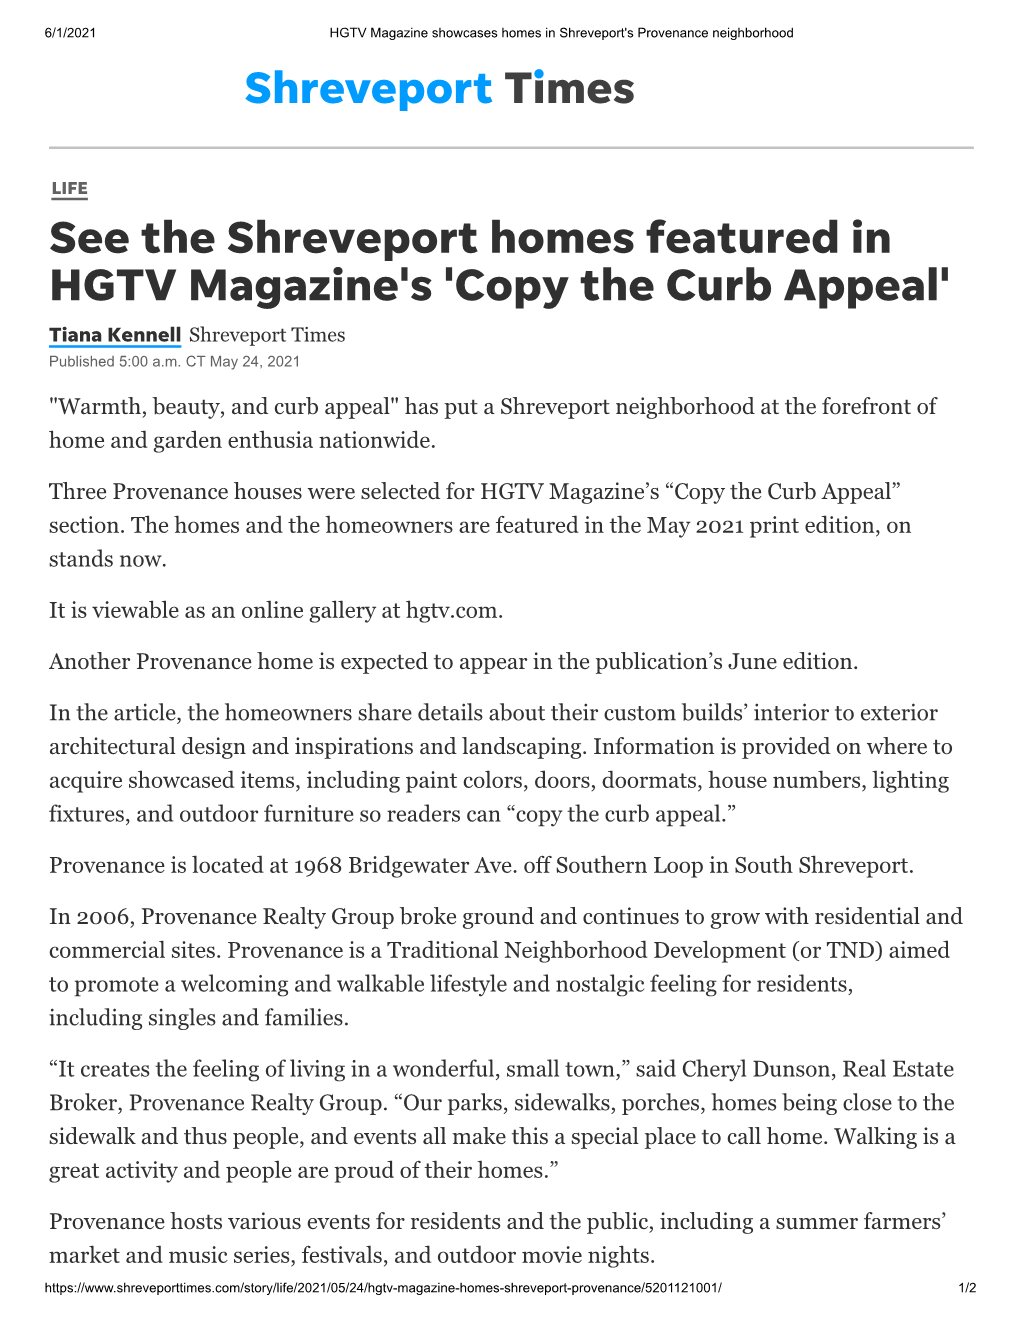 See the Shreveport Homes Featured in HGTV Magazine's 'Copy the Curb Appeal' Tiana Kennell Shreveport Times Published 5:00 A.M